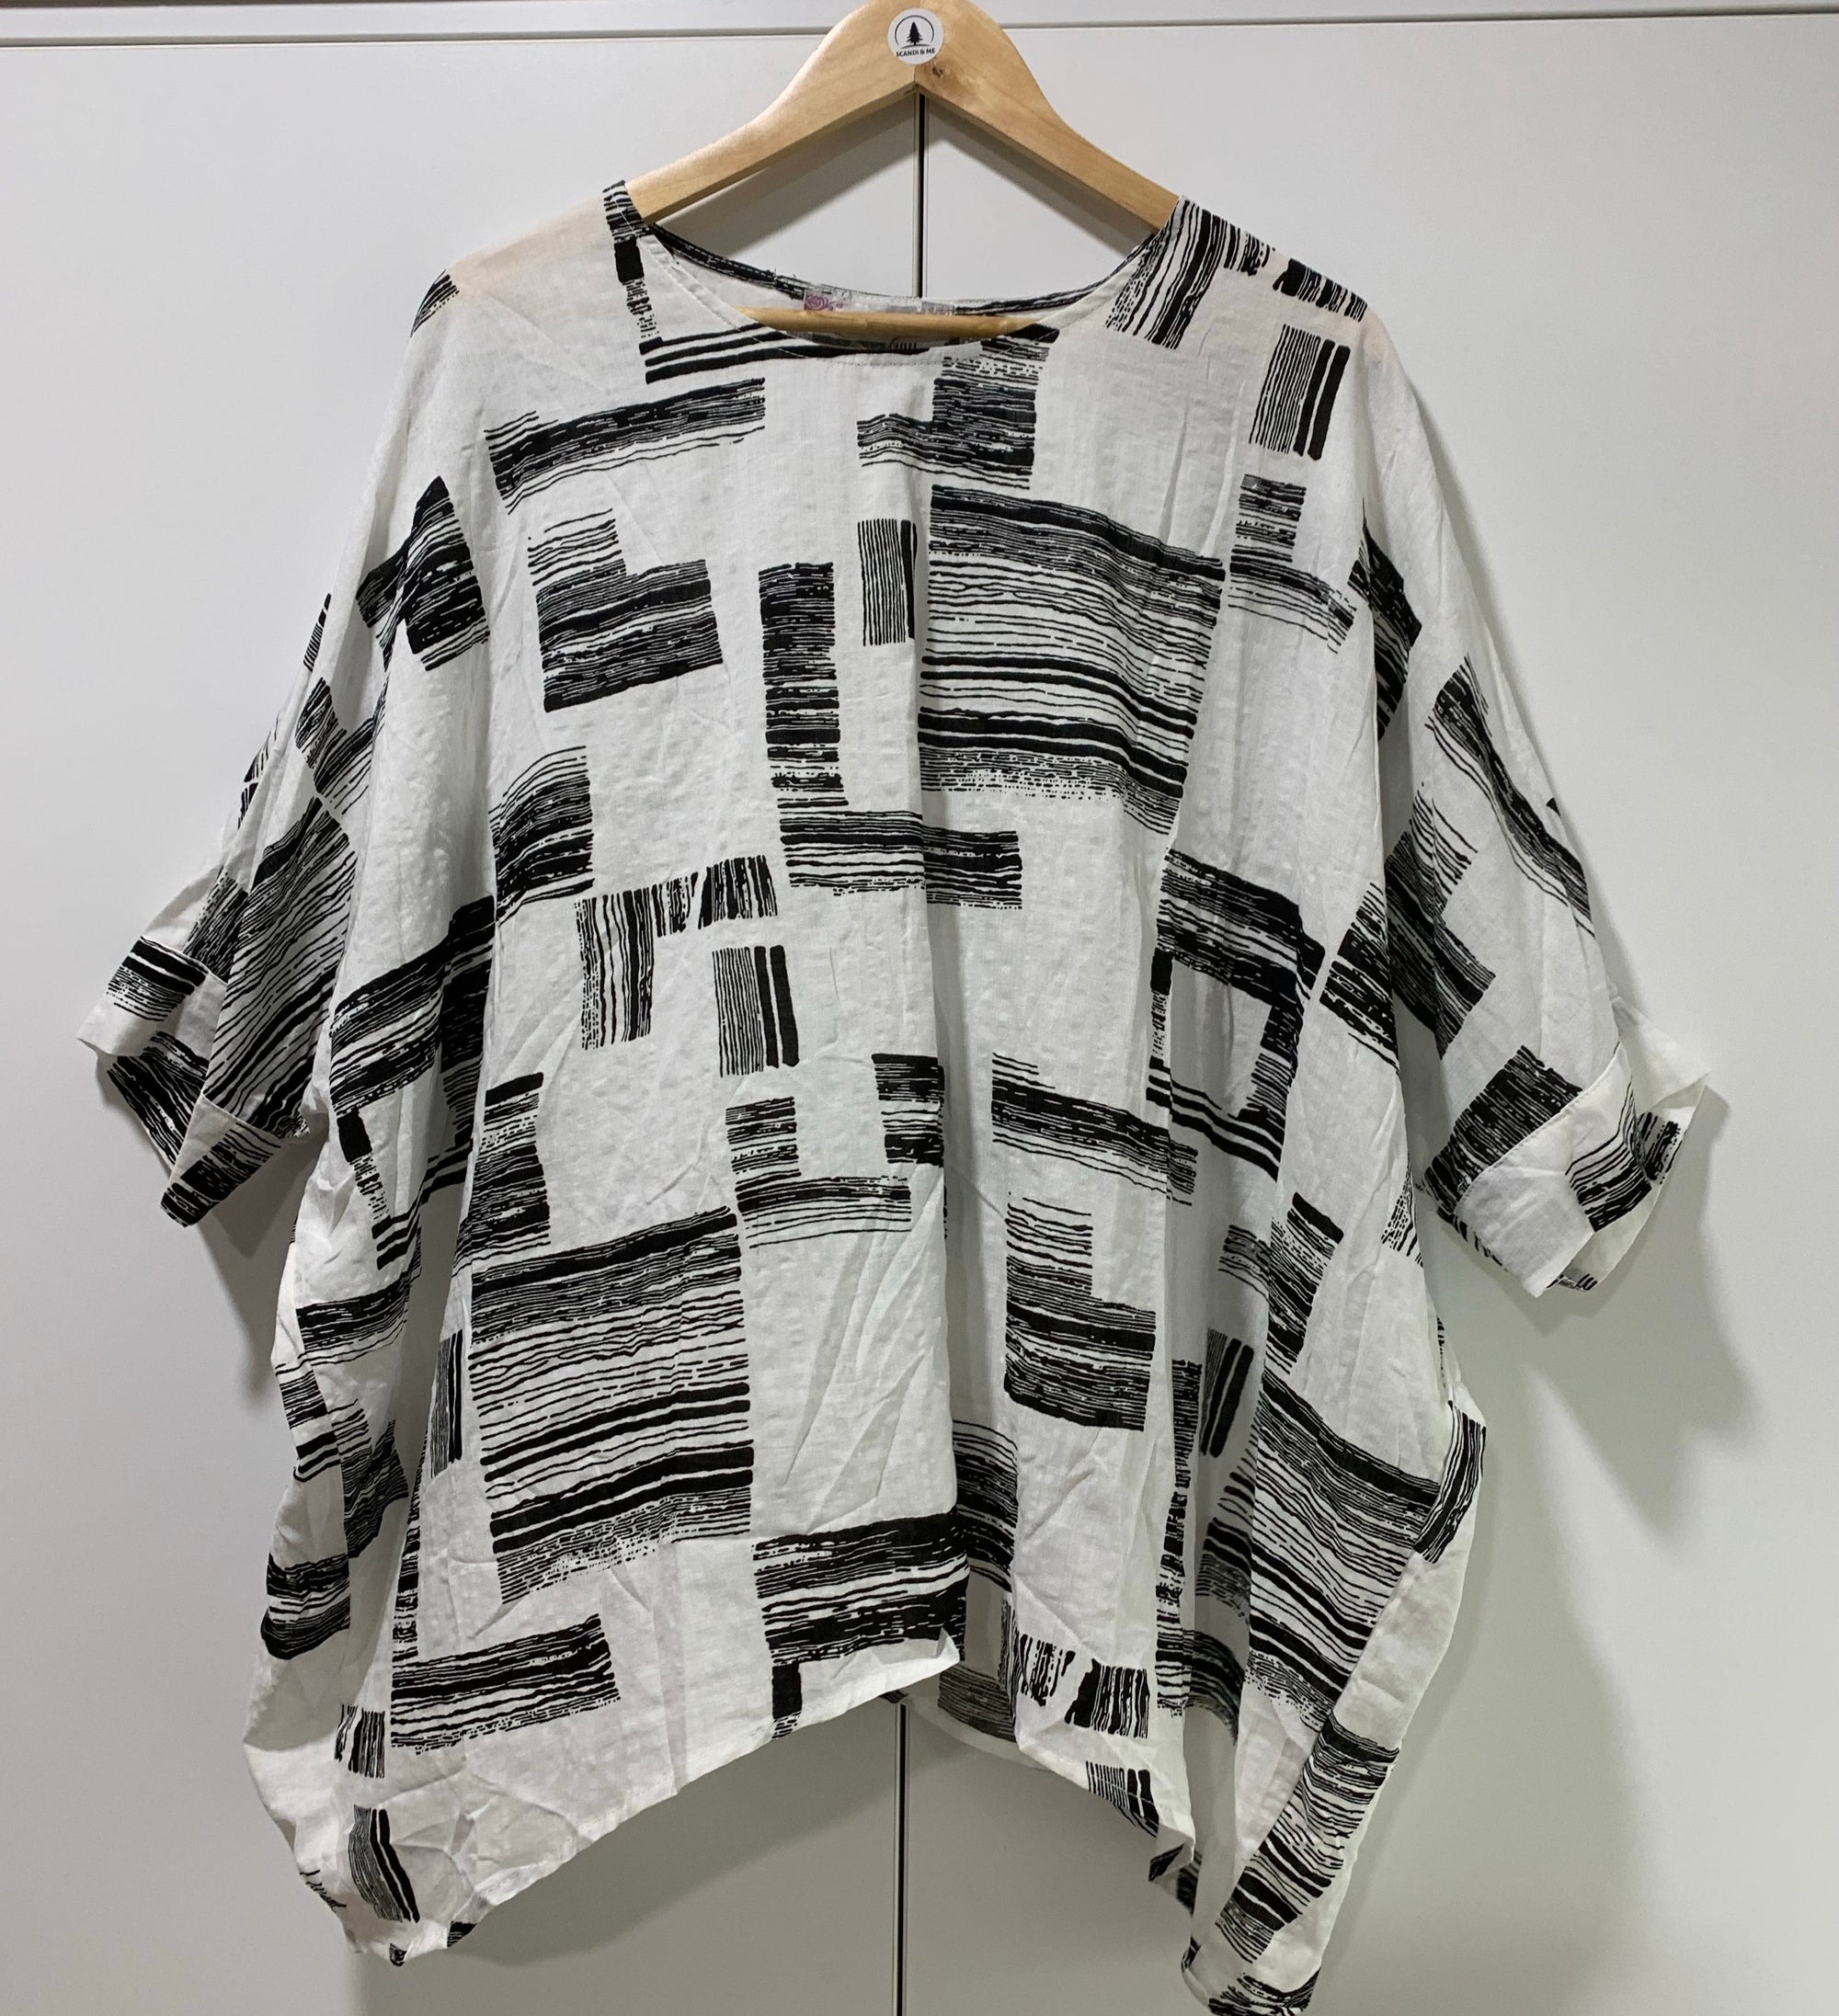 Linen Blend Top in Black & White Relaxed Fit - Available in Sizes S/M & L/XL